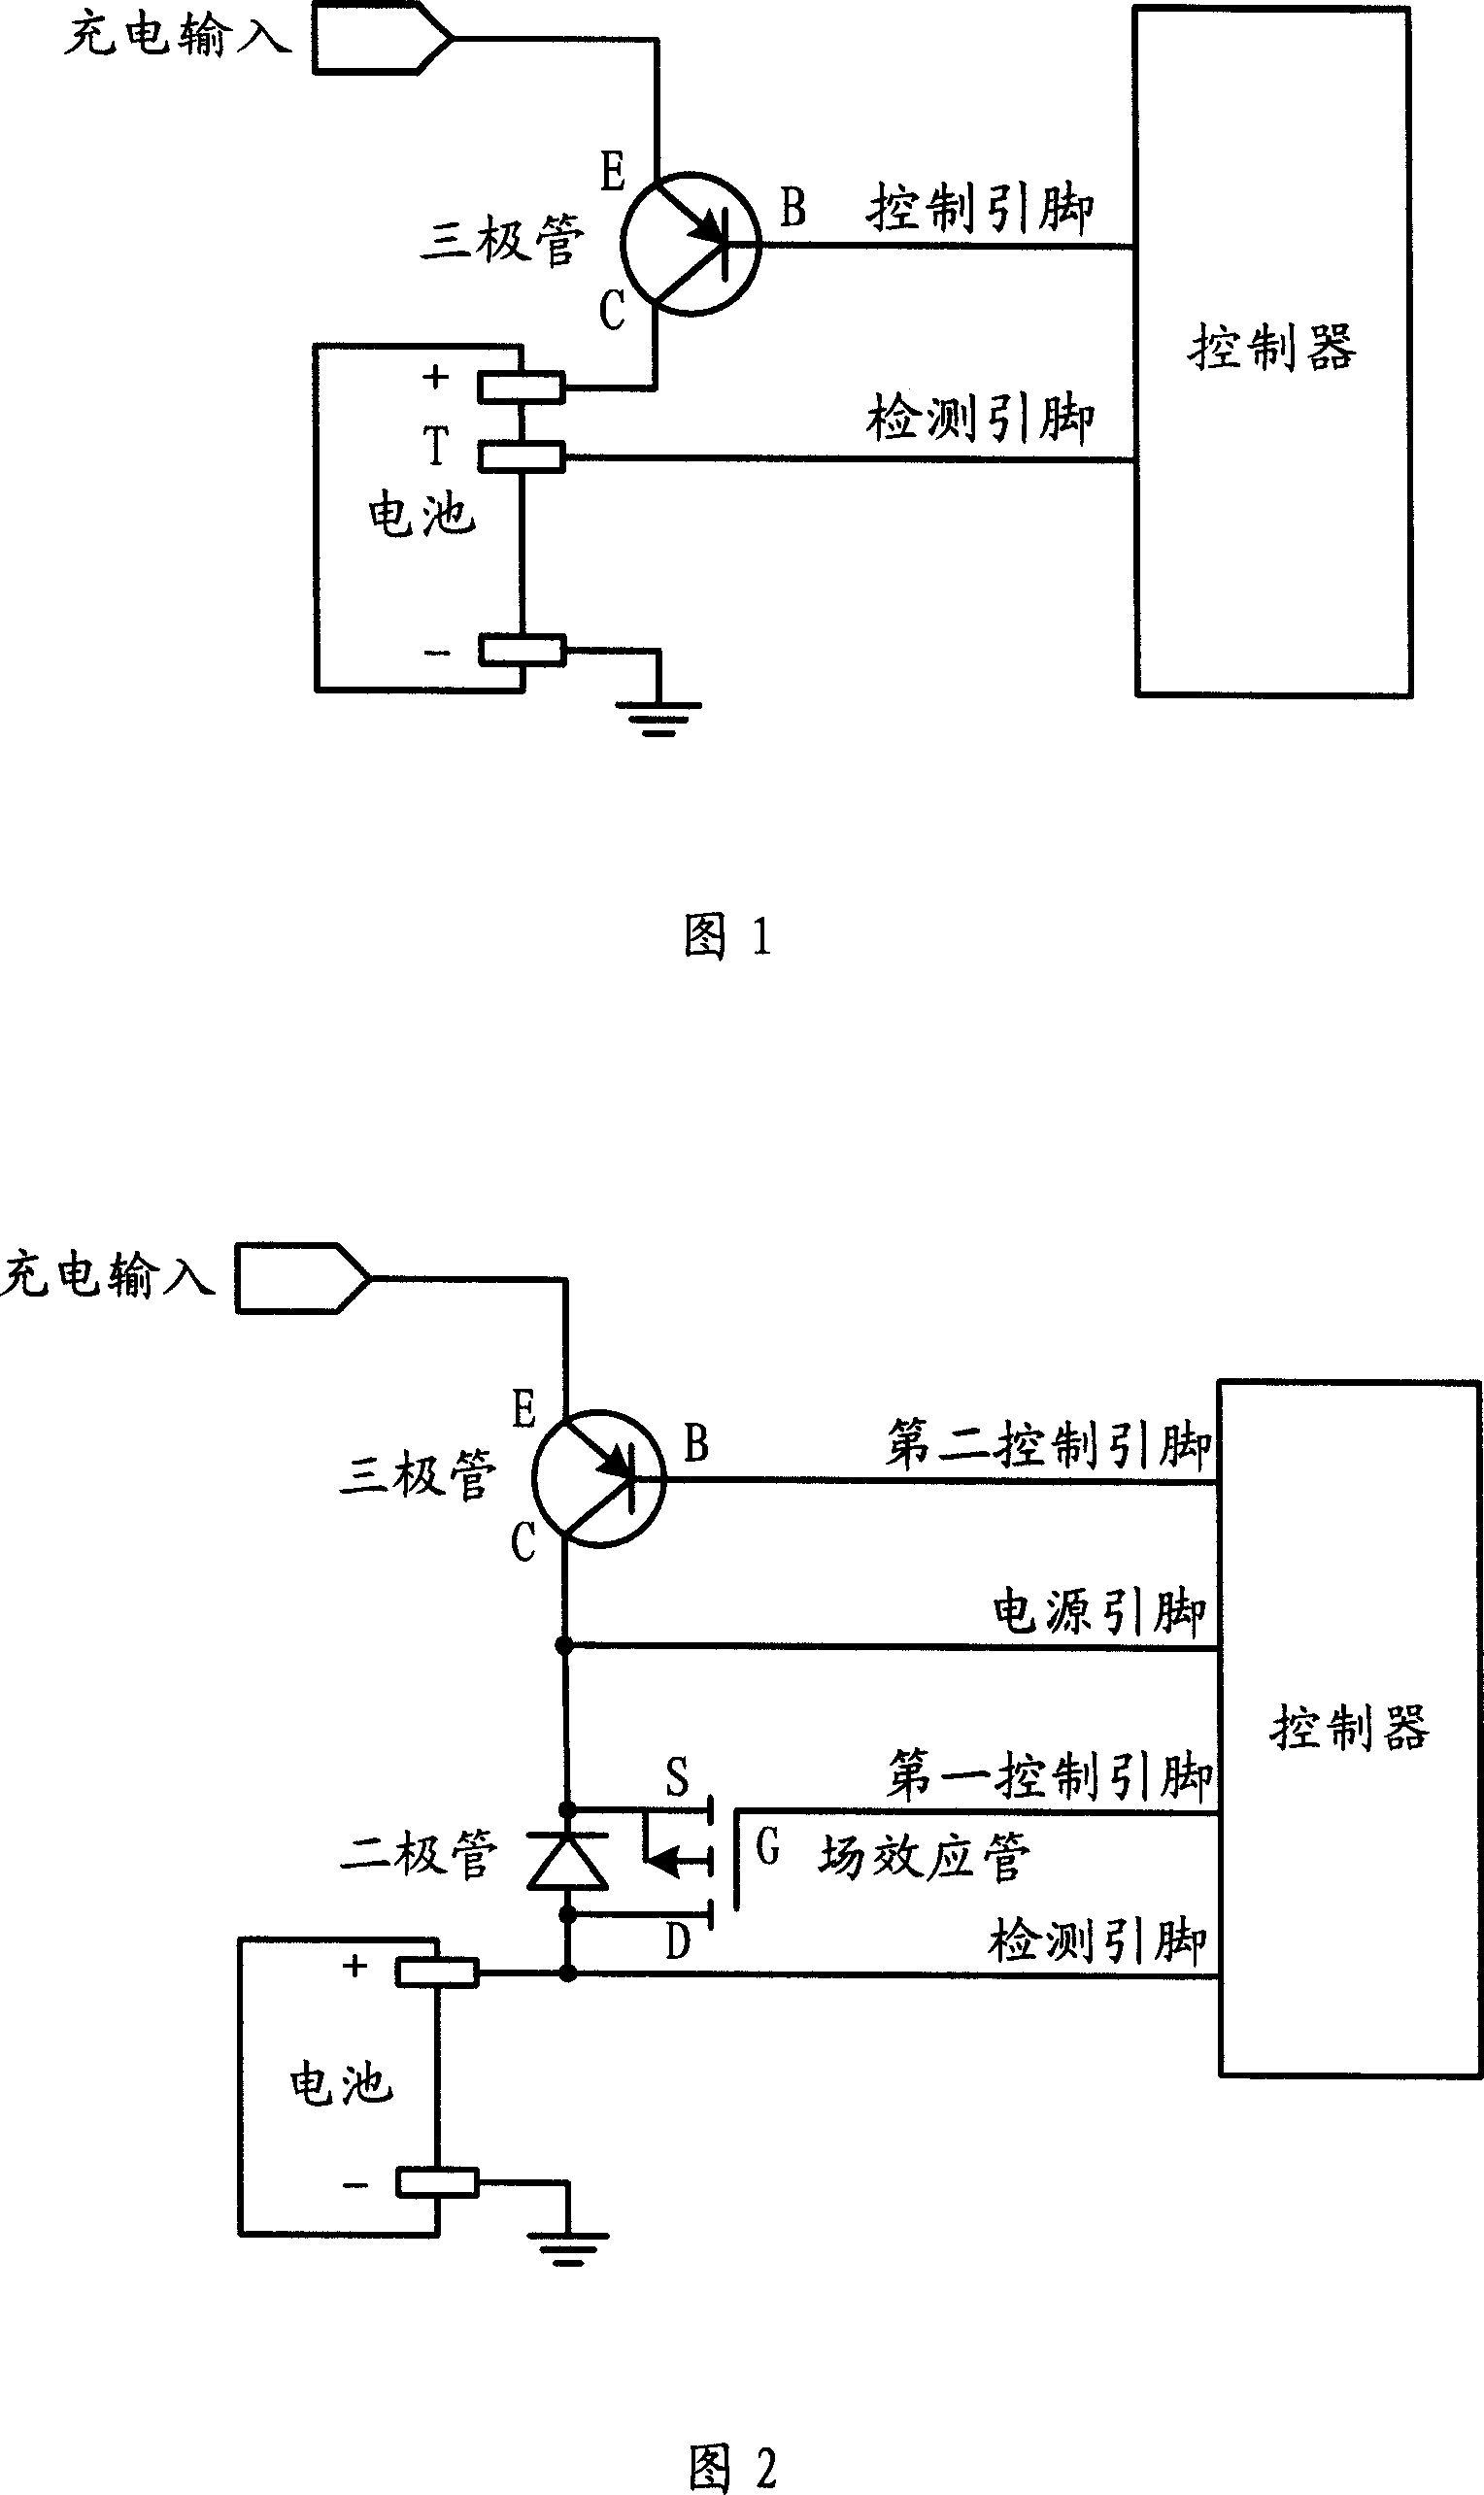 Battery in-position detection system when charging of electronic apparatus